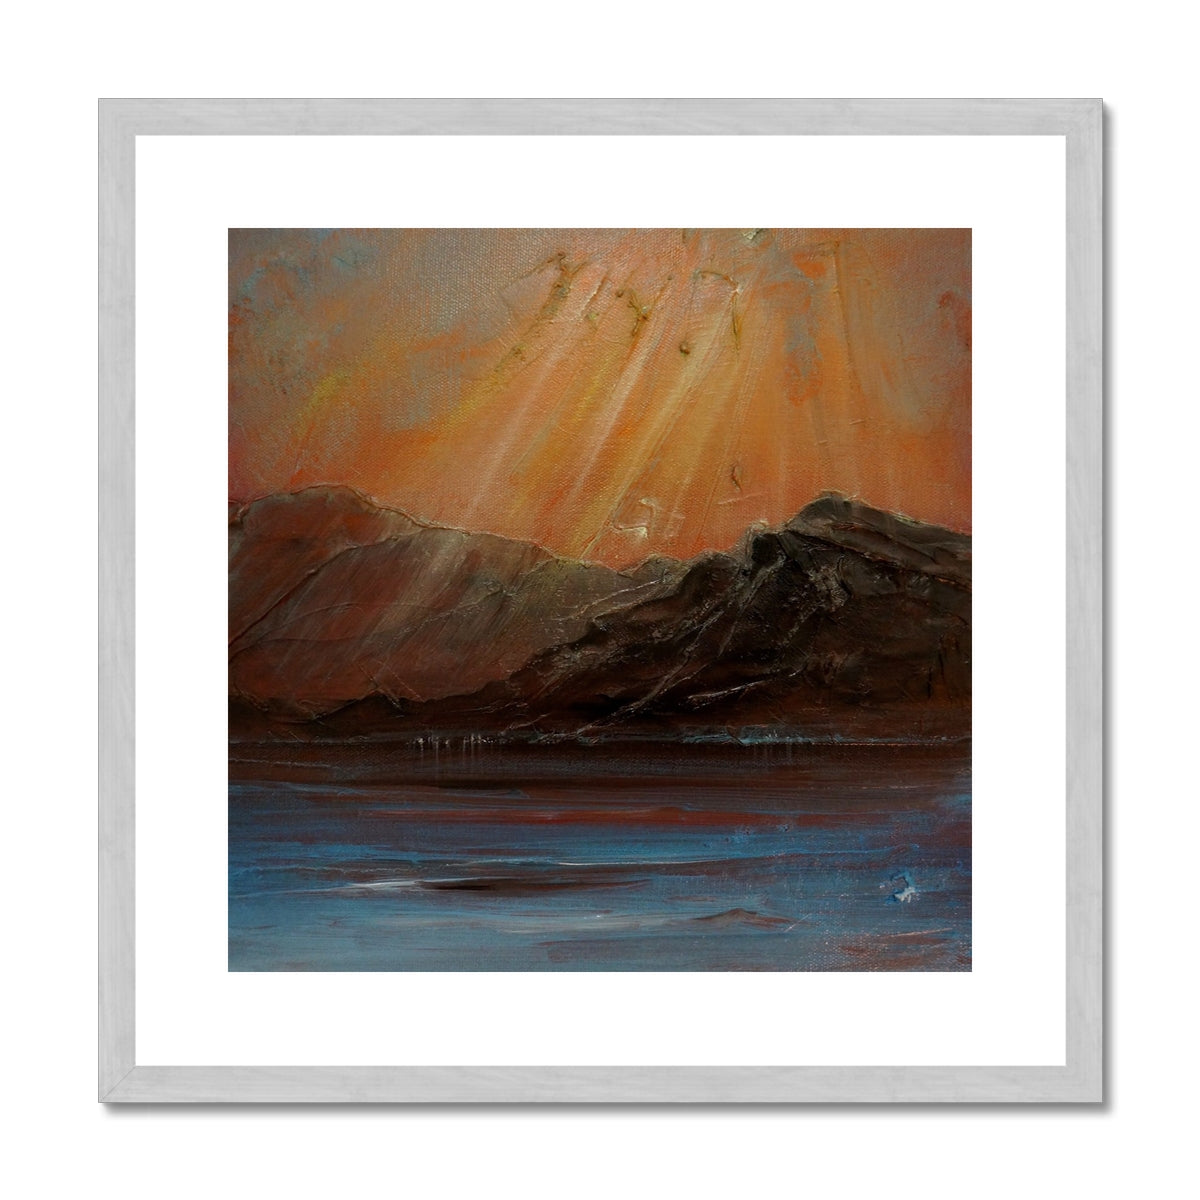 Torridon ii Painting | Antique Framed & Mounted Prints From Scotland-Antique Framed & Mounted Prints-Scottish Lochs & Mountains Art Gallery-20"x20"-Silver Frame-Paintings, Prints, Homeware, Art Gifts From Scotland By Scottish Artist Kevin Hunter